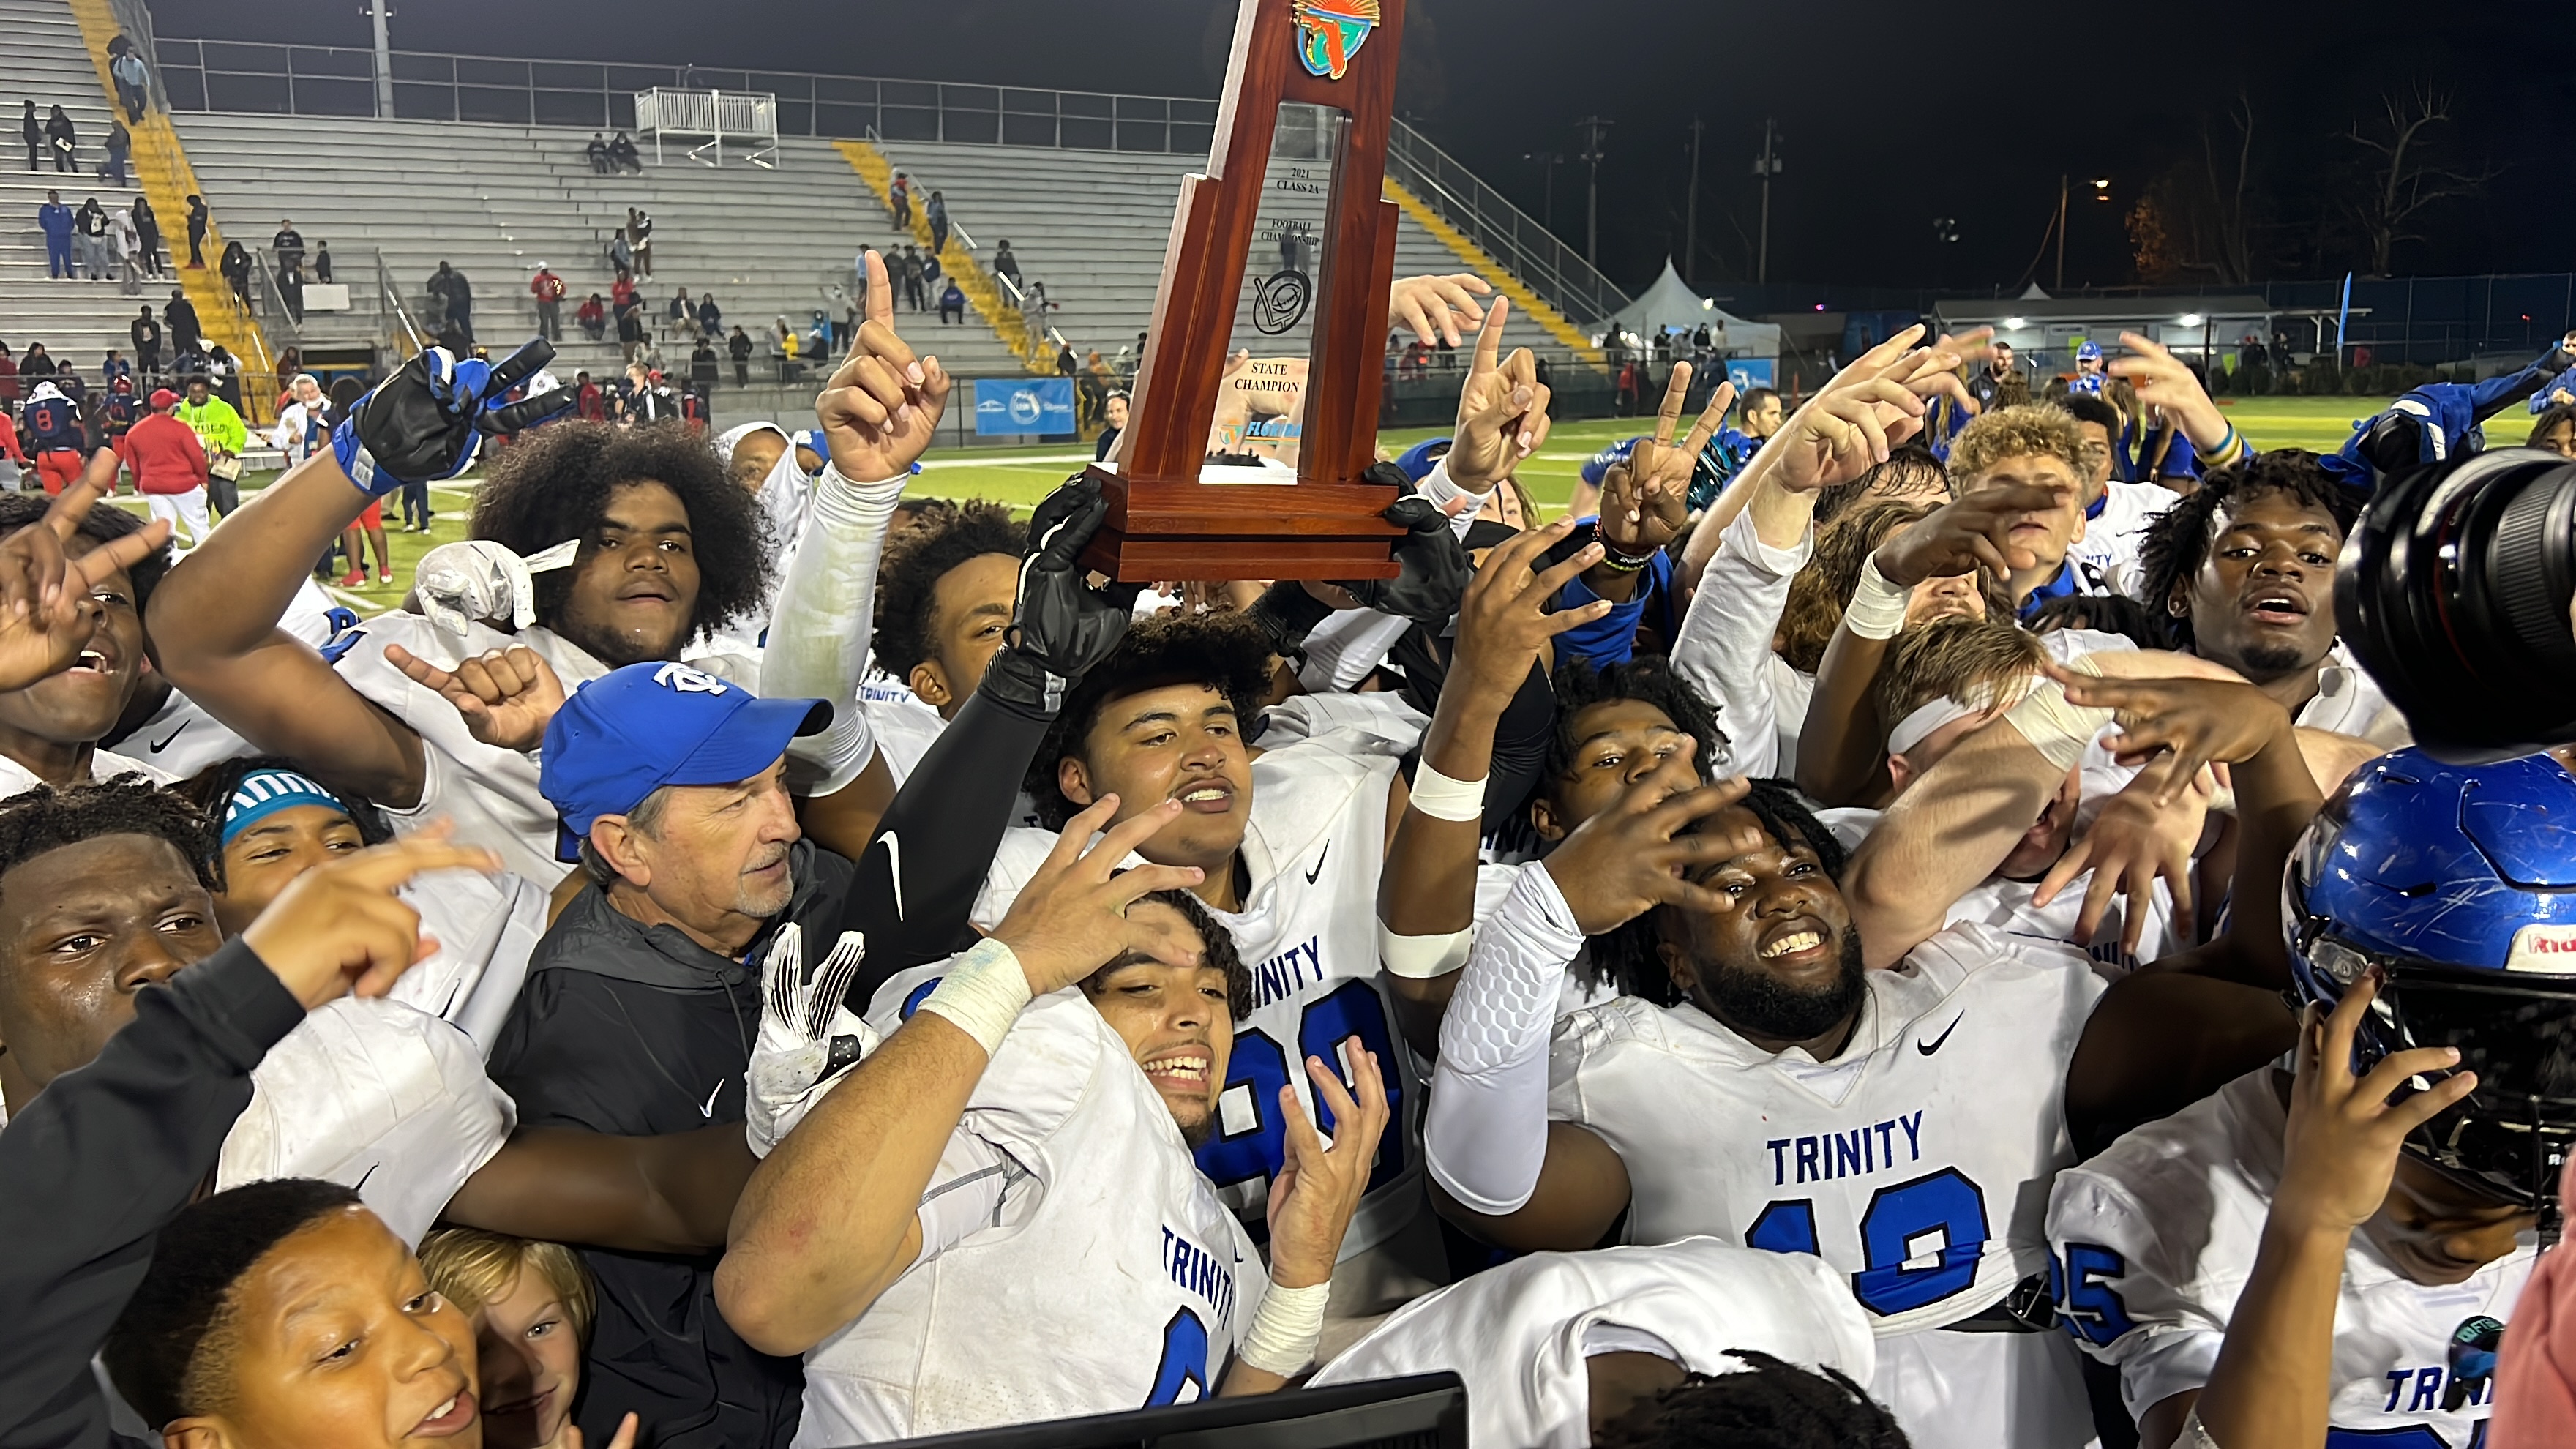 2022 Football State Championships in Tallahassee: Know Before You Go -  Florida High School Athletic Association